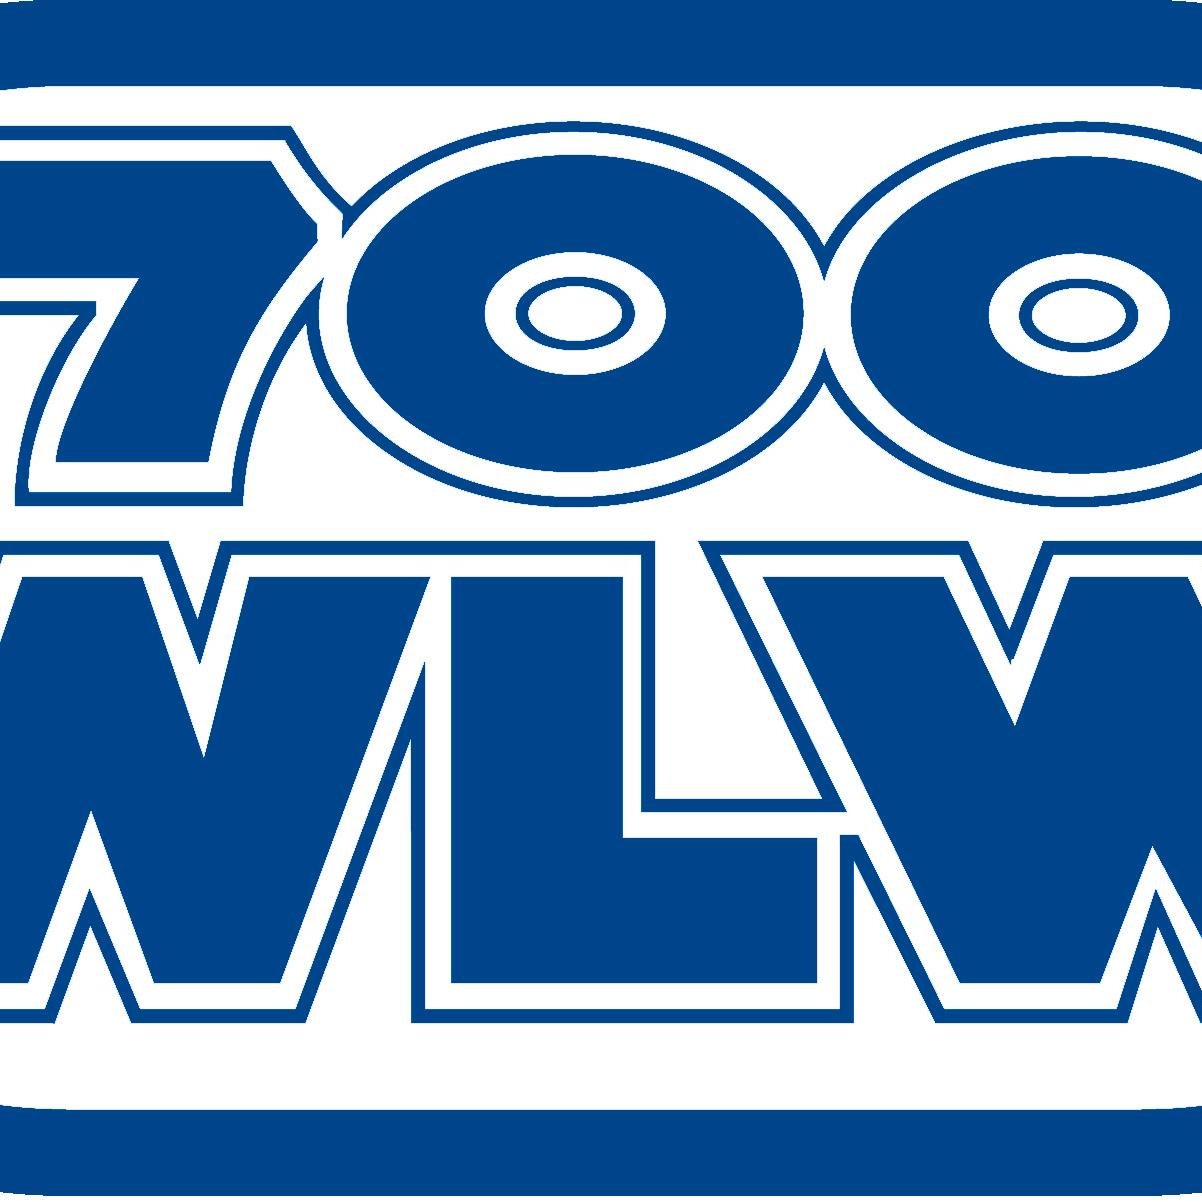 Your one stop shop for all advertising and marketing opportunities with 700WLW, ESPN 1530 and Fox Sports 1360...plus Reds, Bengals, UC, Xavier, & HS Football.